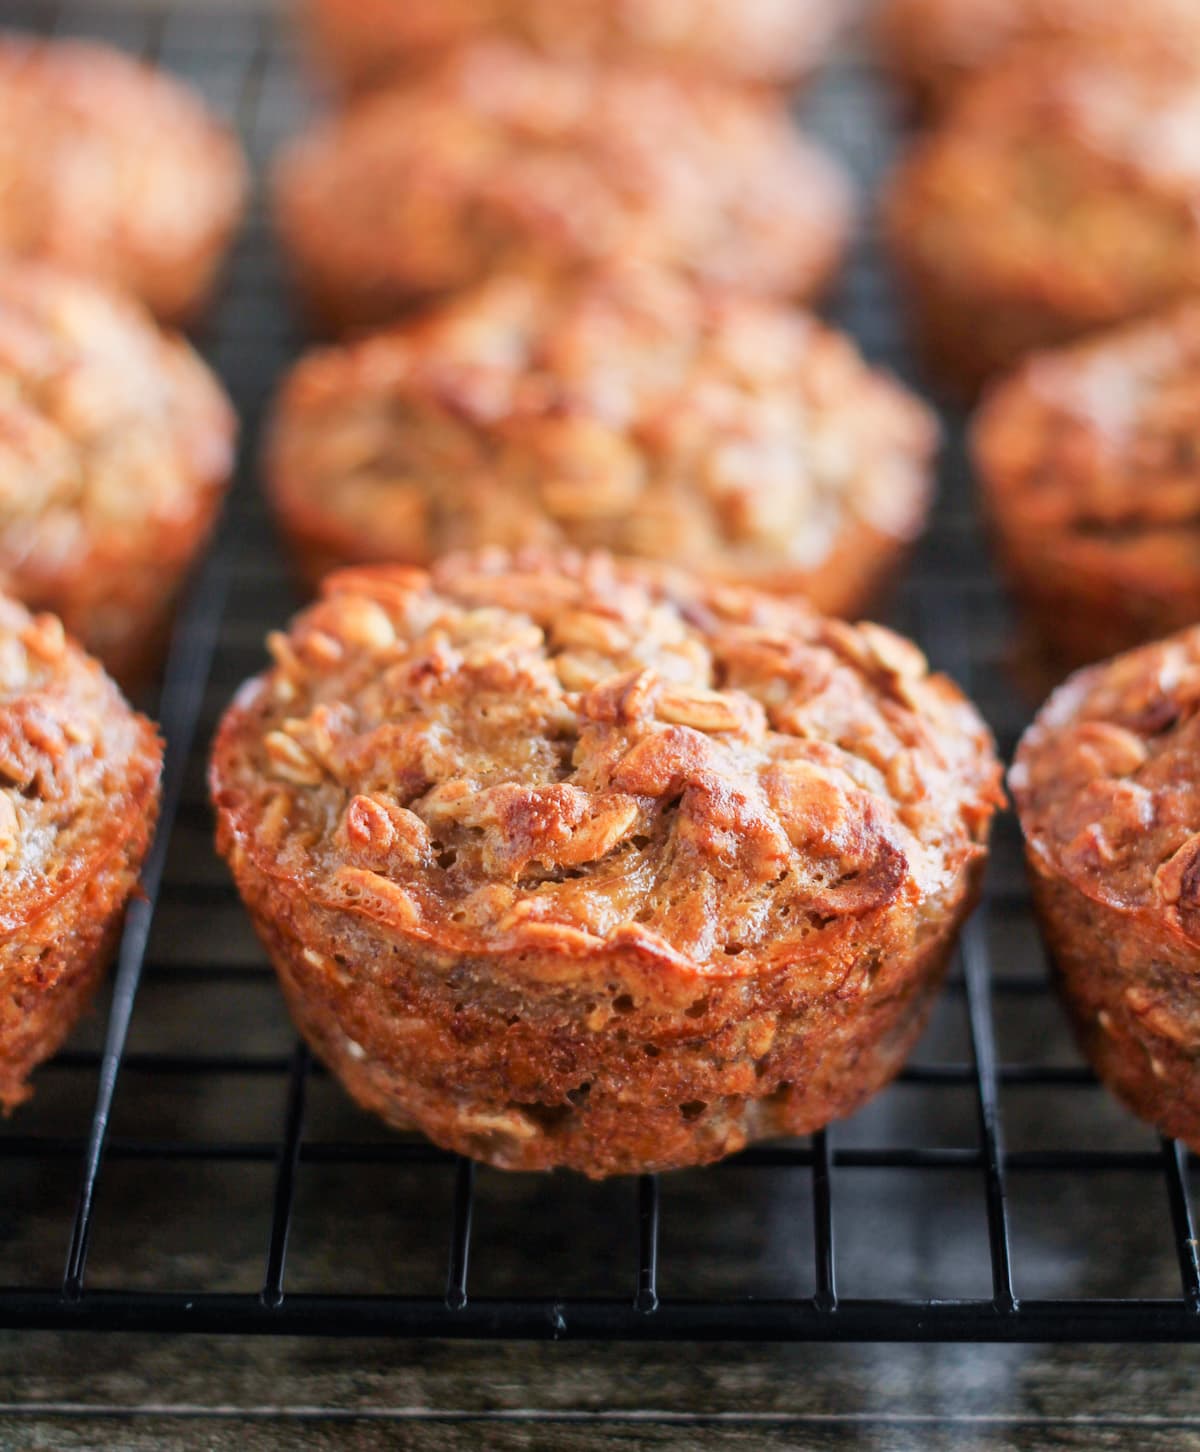 Banana oat muffins on a wire baking rack.